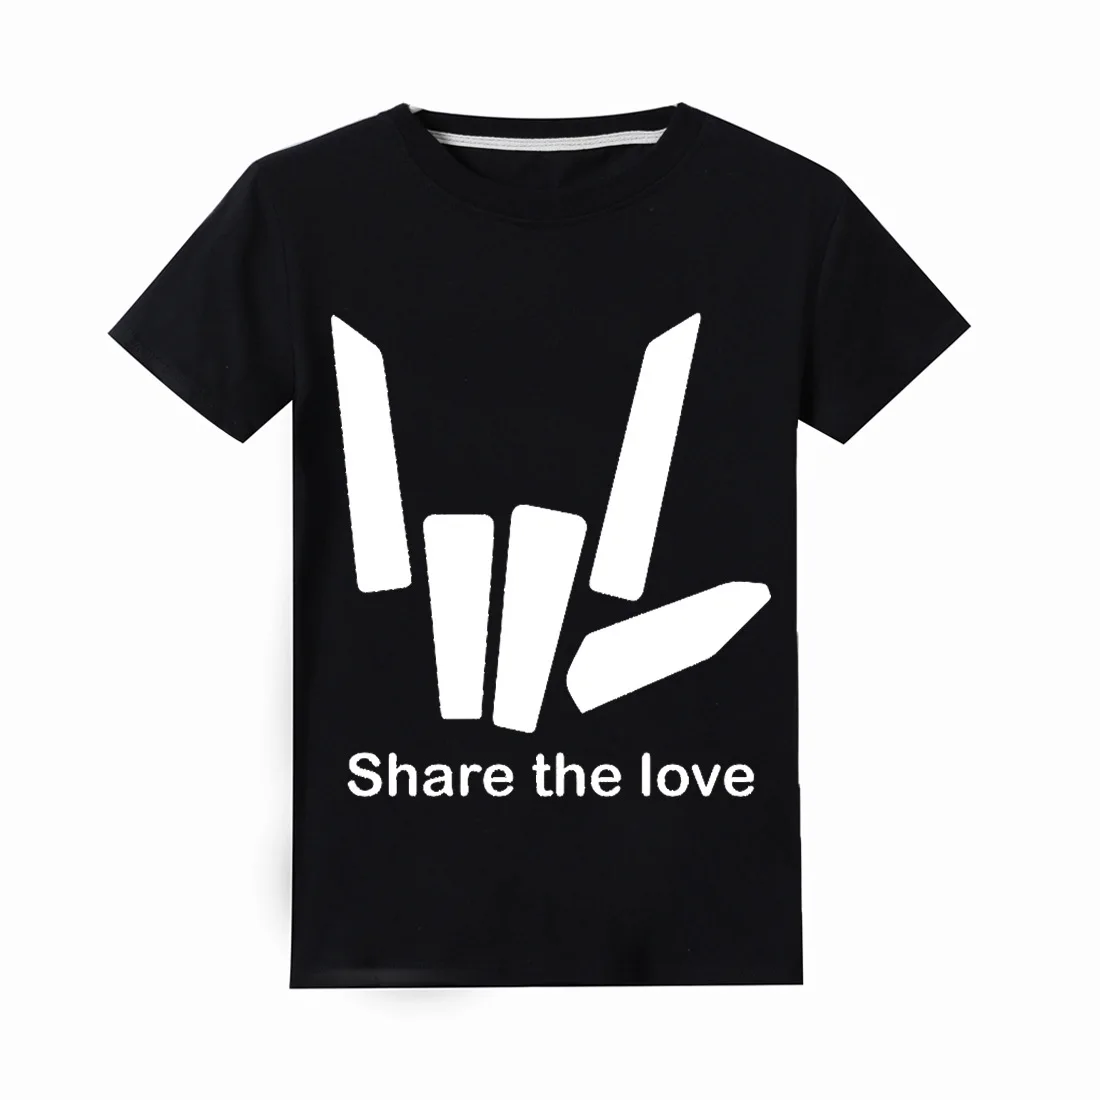 Thanksgiving Youth Share The Love Hoodies Long Sleeve T-shirt Different Colors Graphic Prestonplayz tshirt kids shirt Tops Tees - Color: tee-black